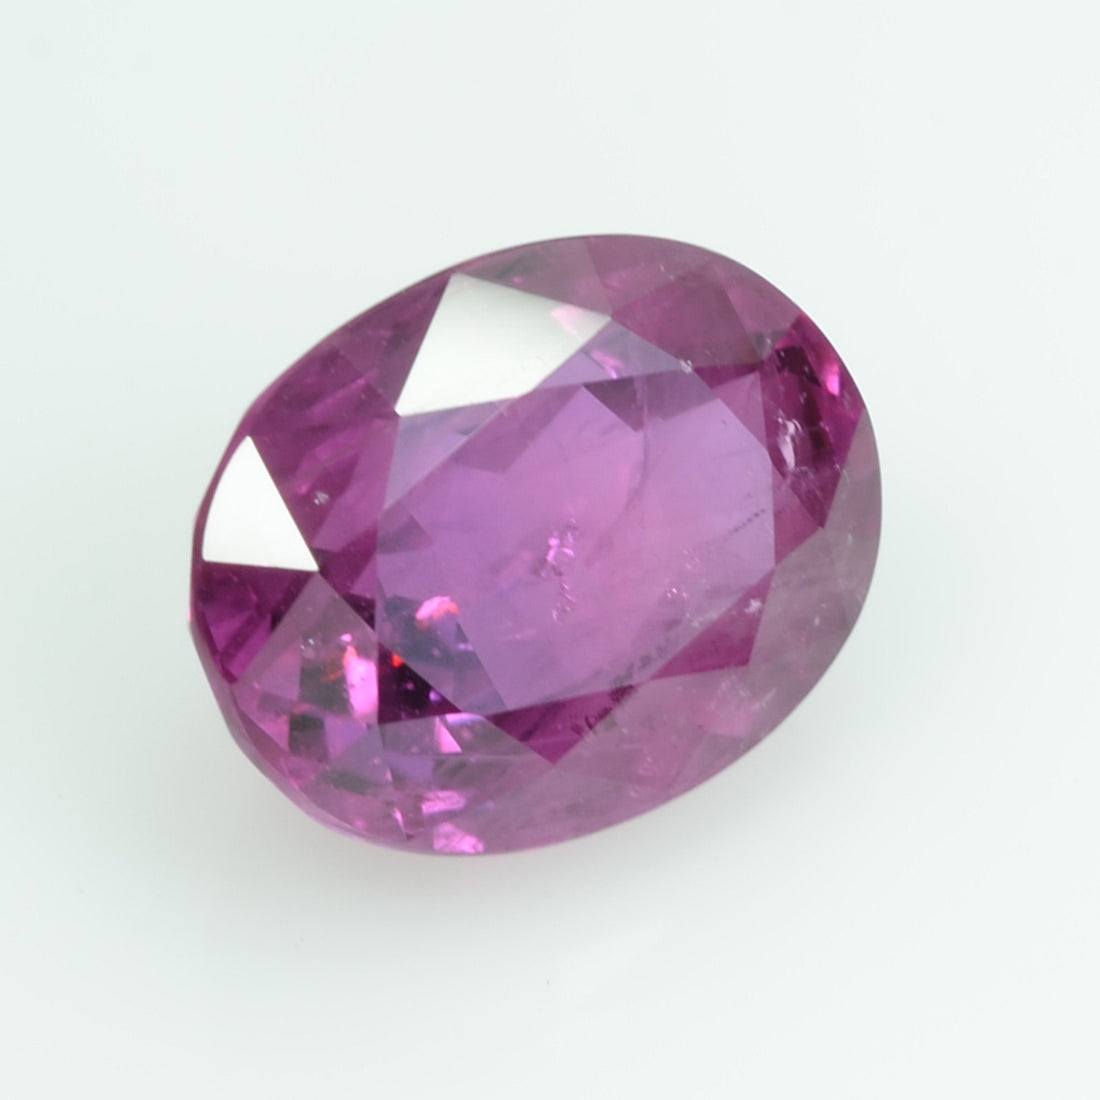 4.28 Cts Natural Purple Sapphire Loose Gemstone Oval Cut